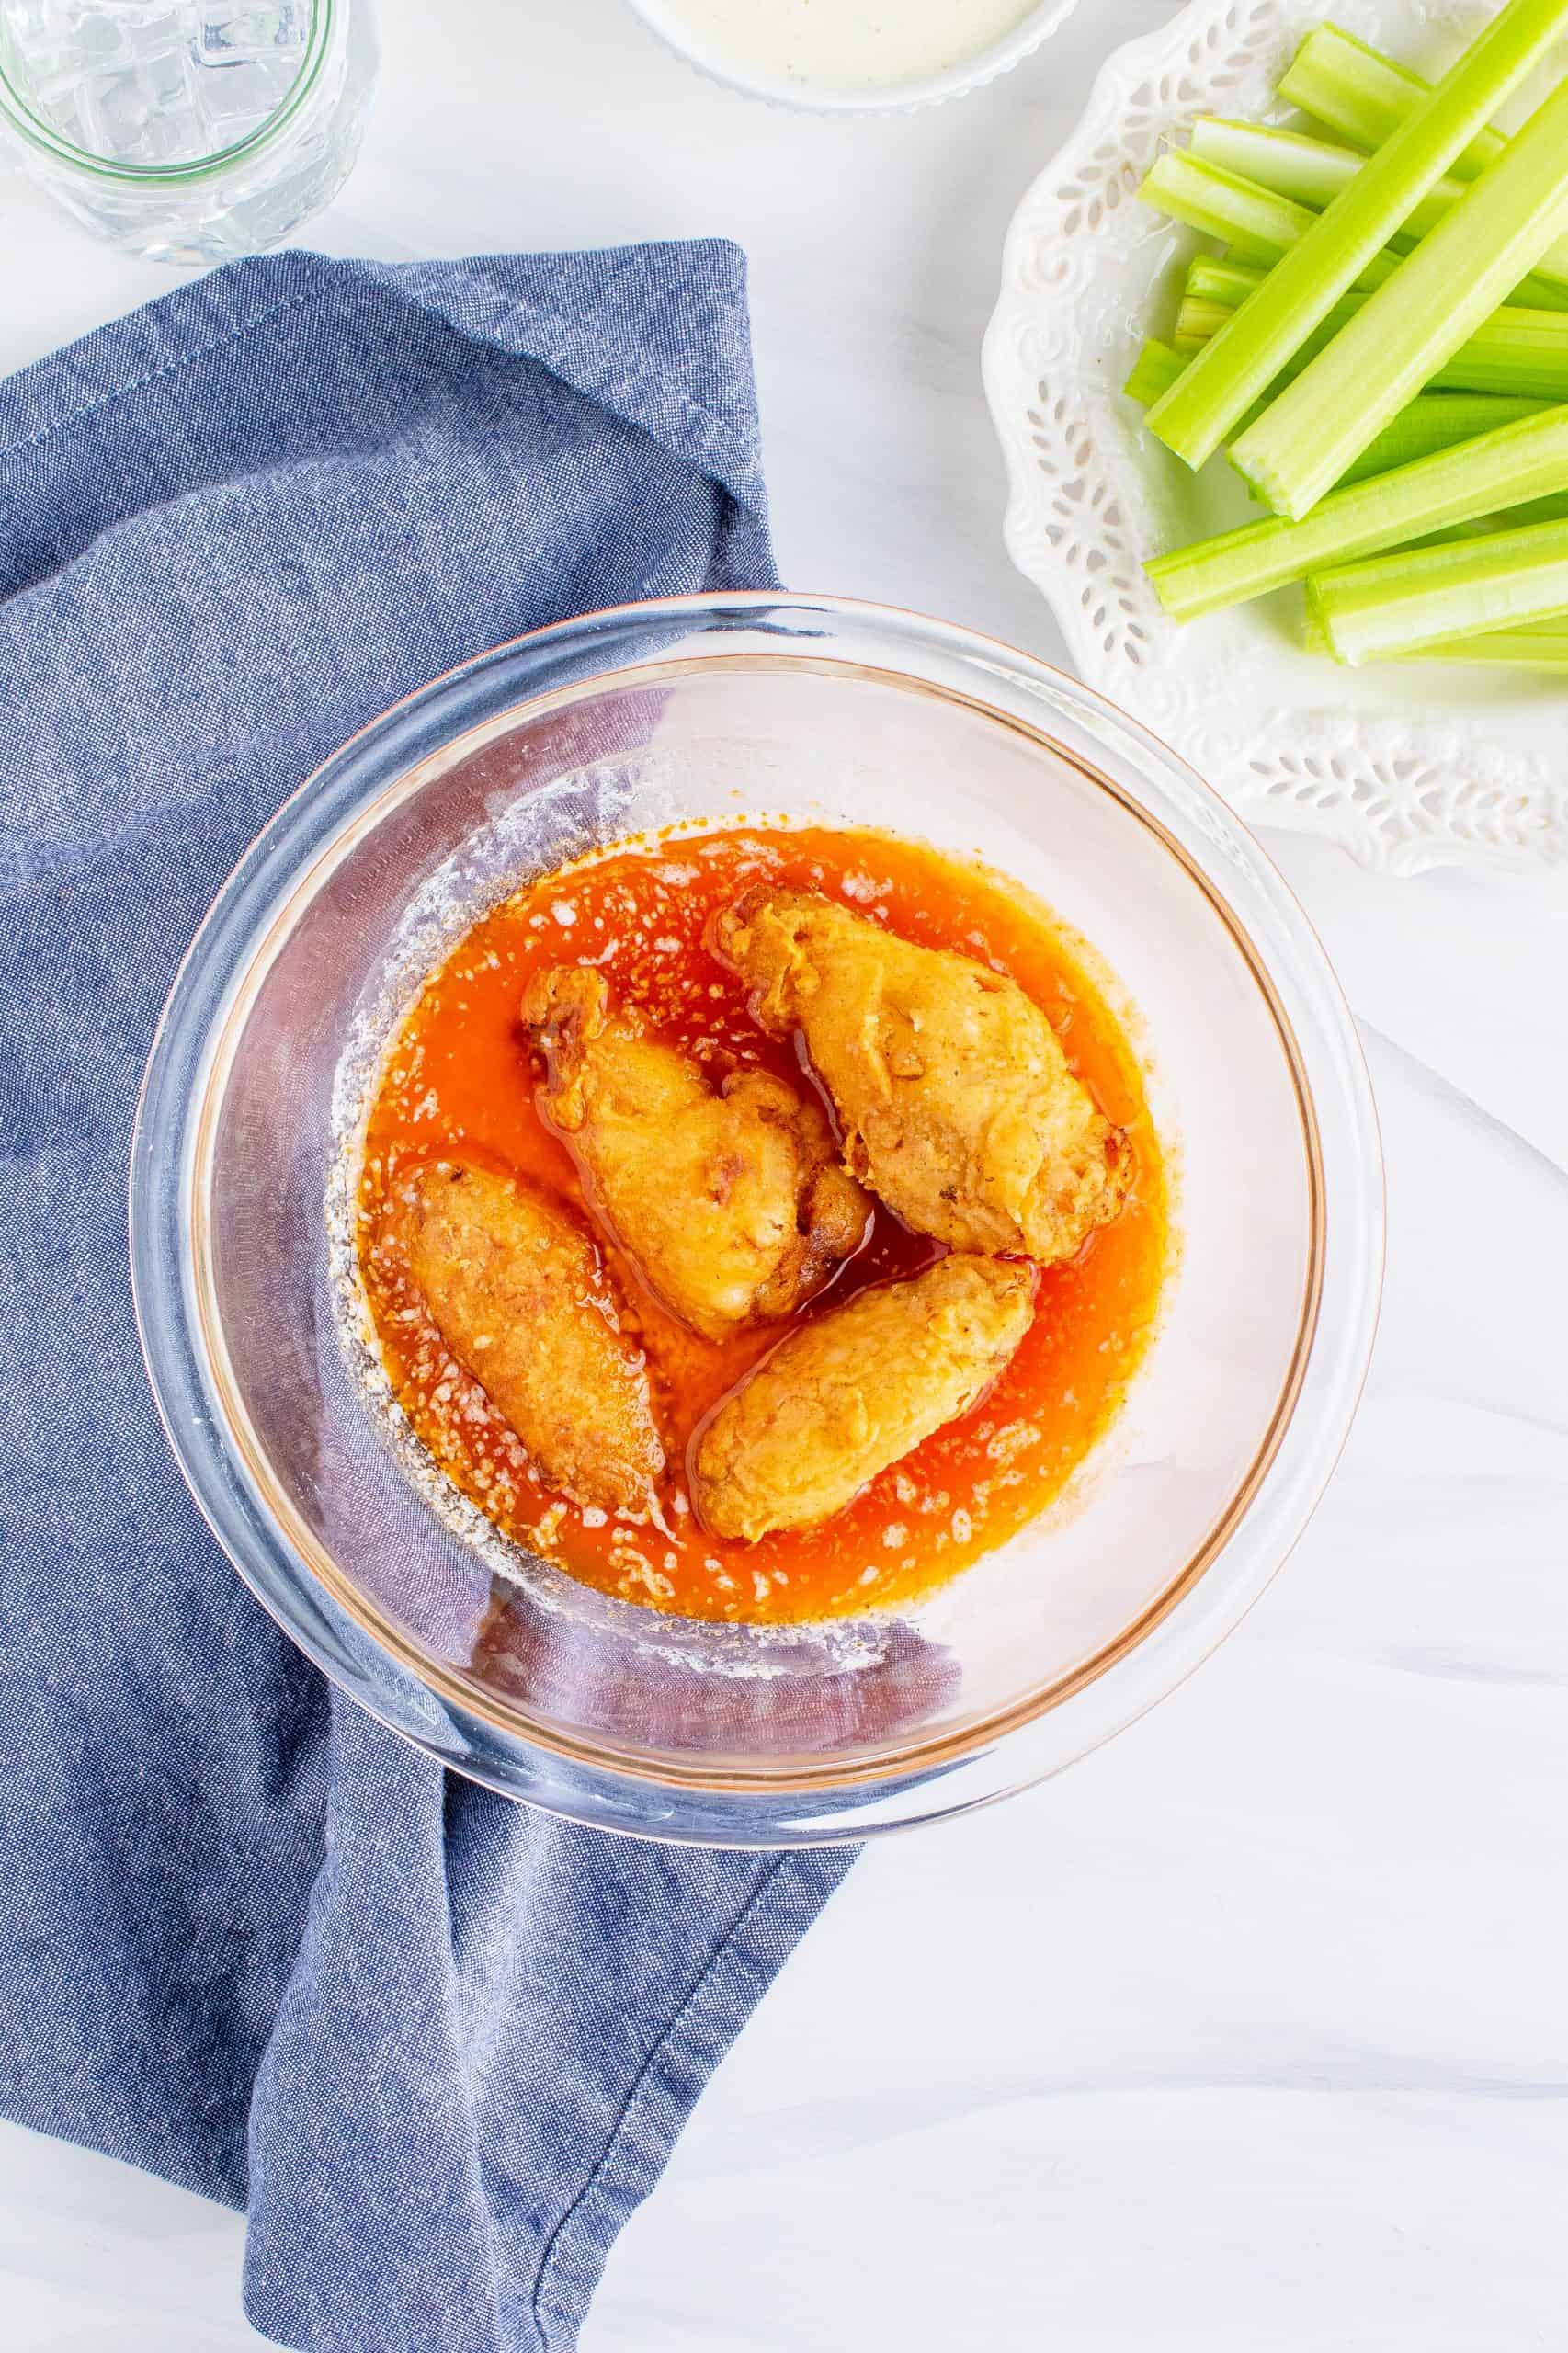 fried chicken wings shown in a bowl with hot sauce and melted butter.